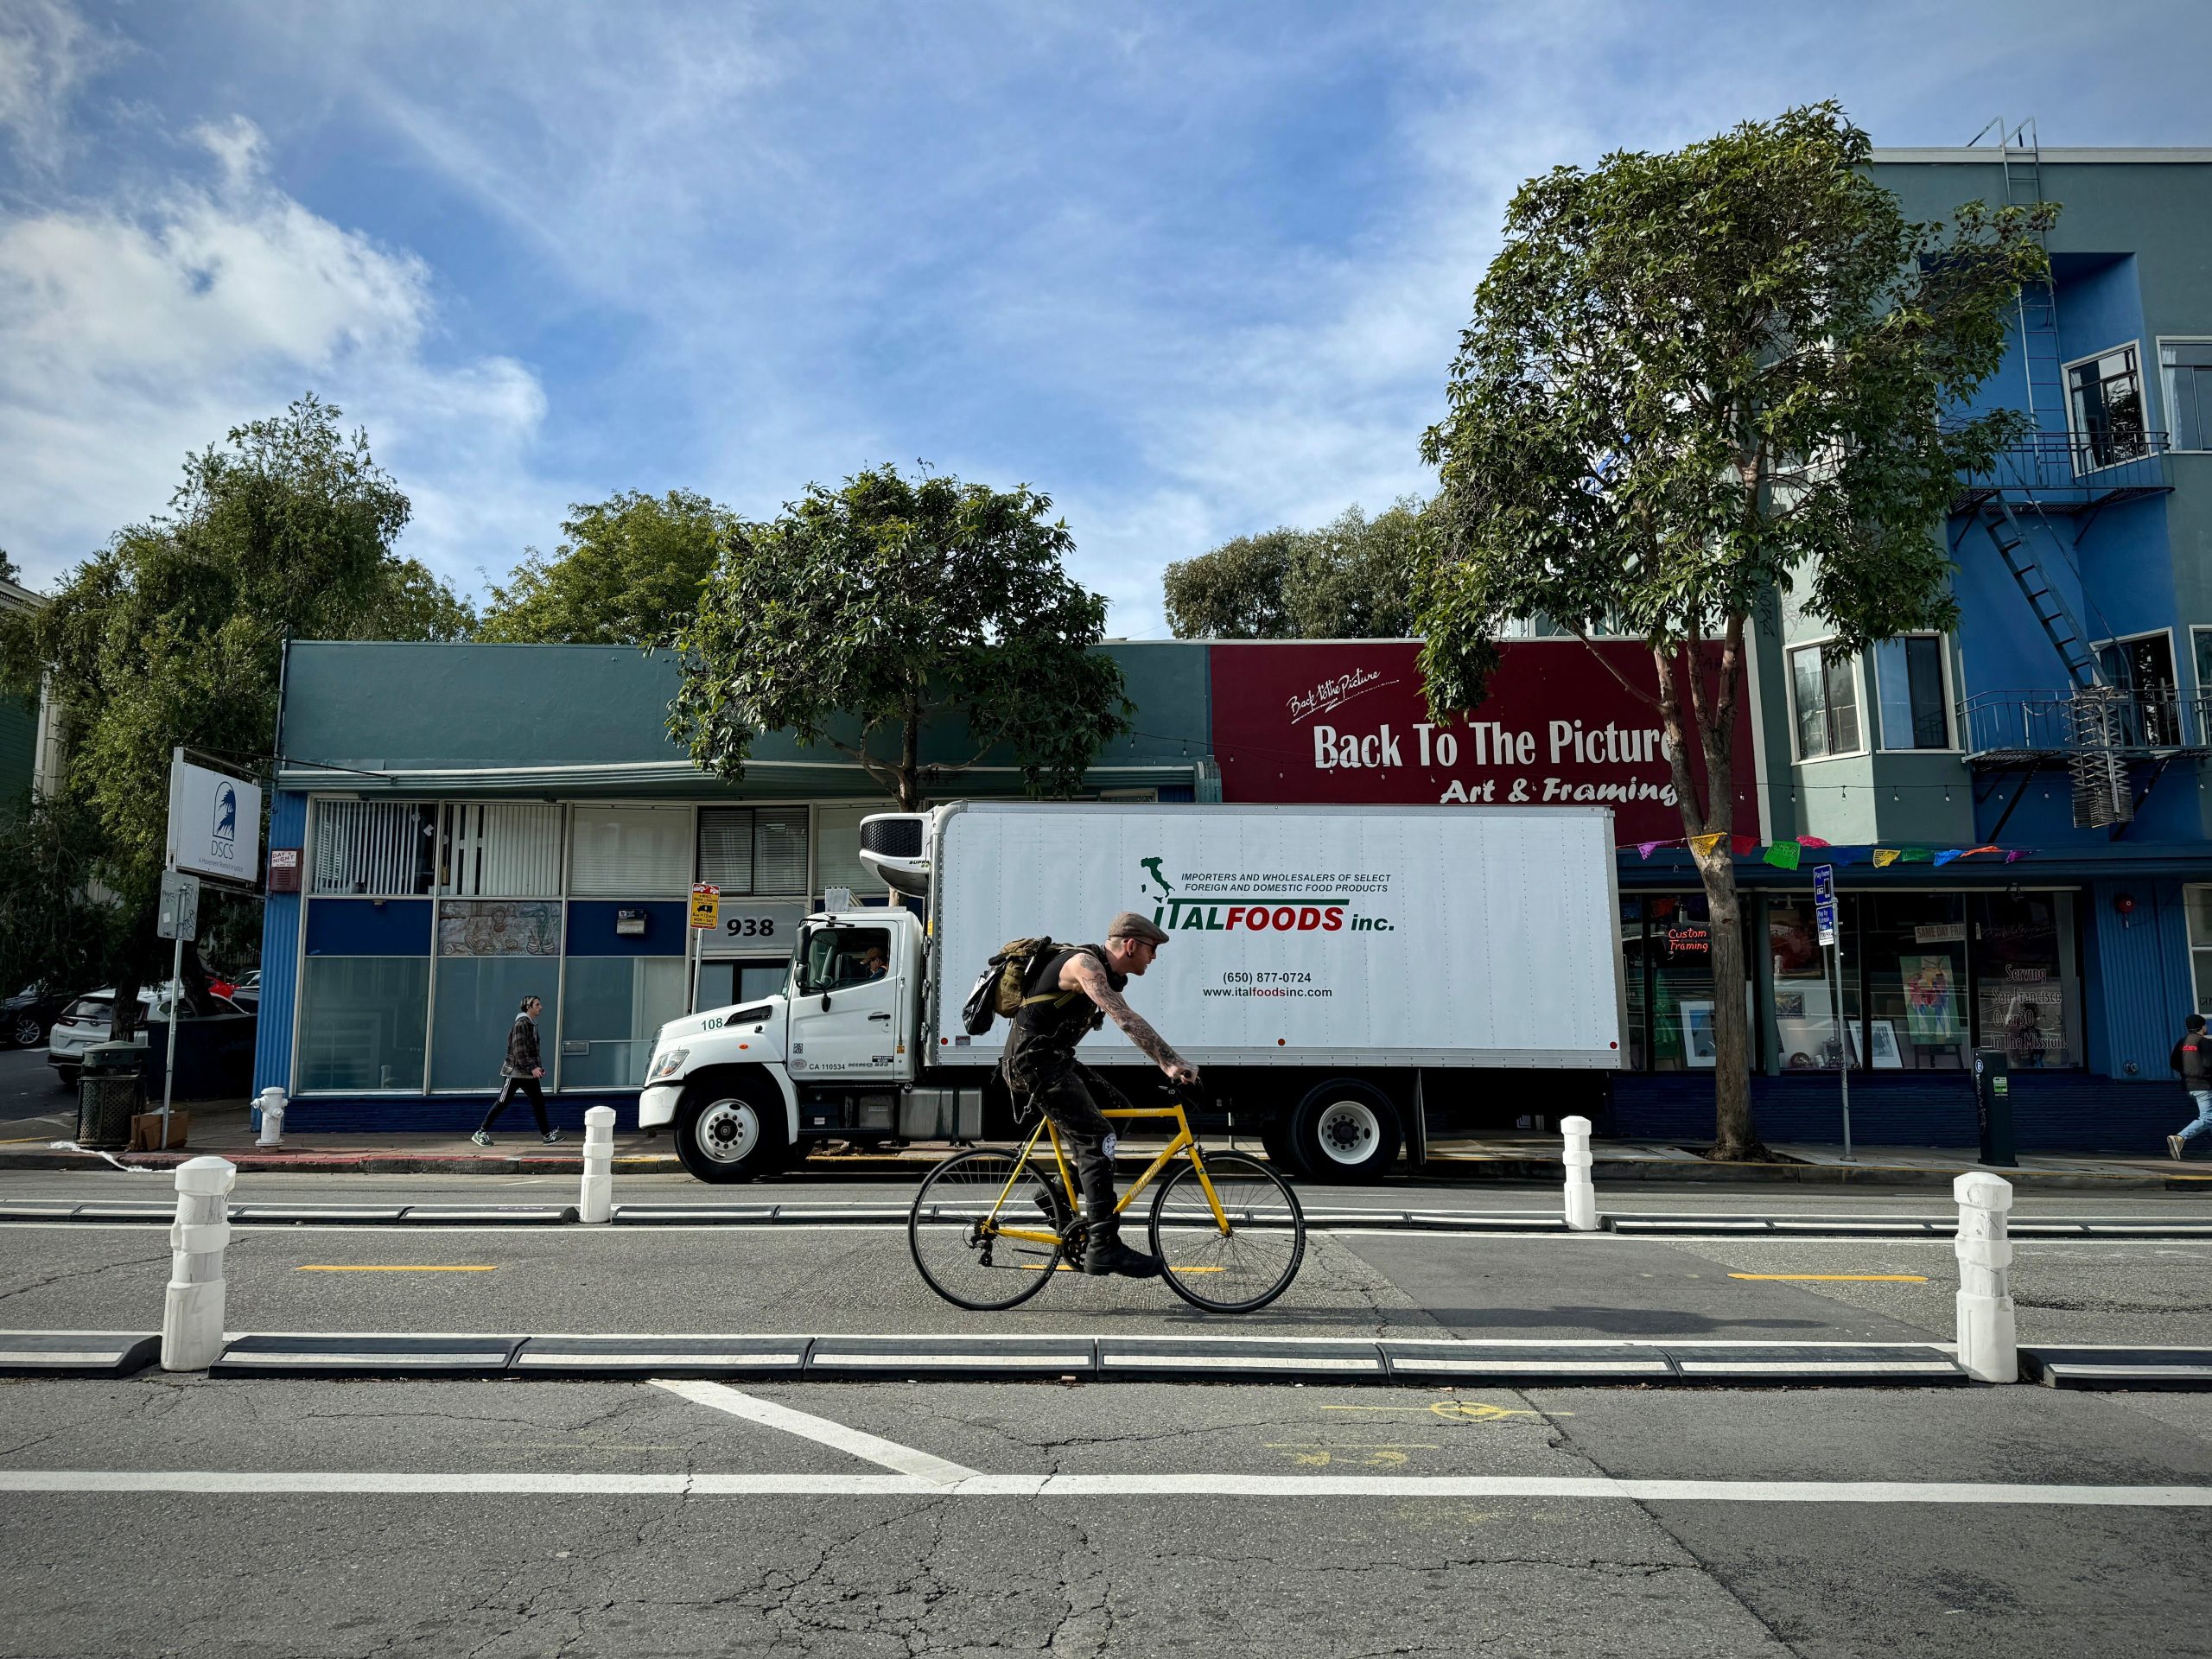  Just how many parking spaces did the Valencia bike lane remove? 